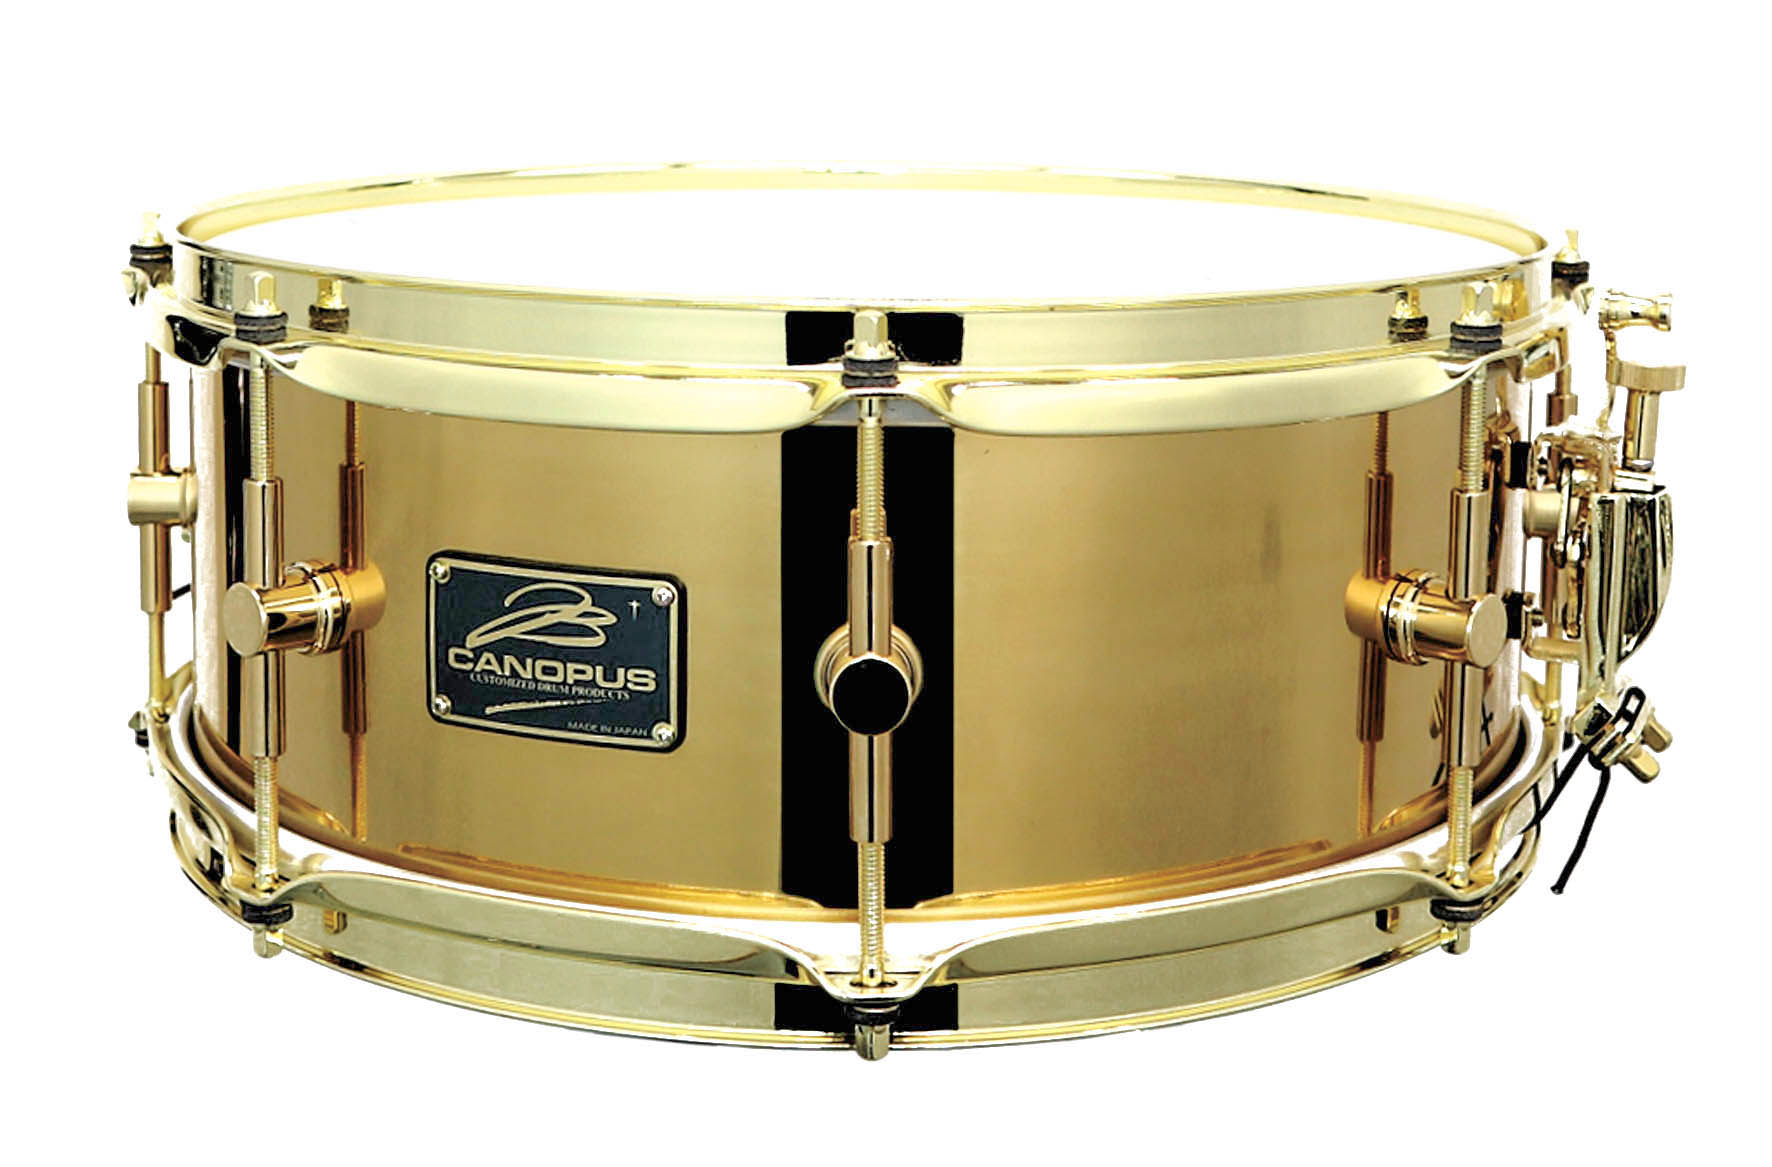 The Brass Snare Drum Limited Edition with All Gold Parts - CANOPUS